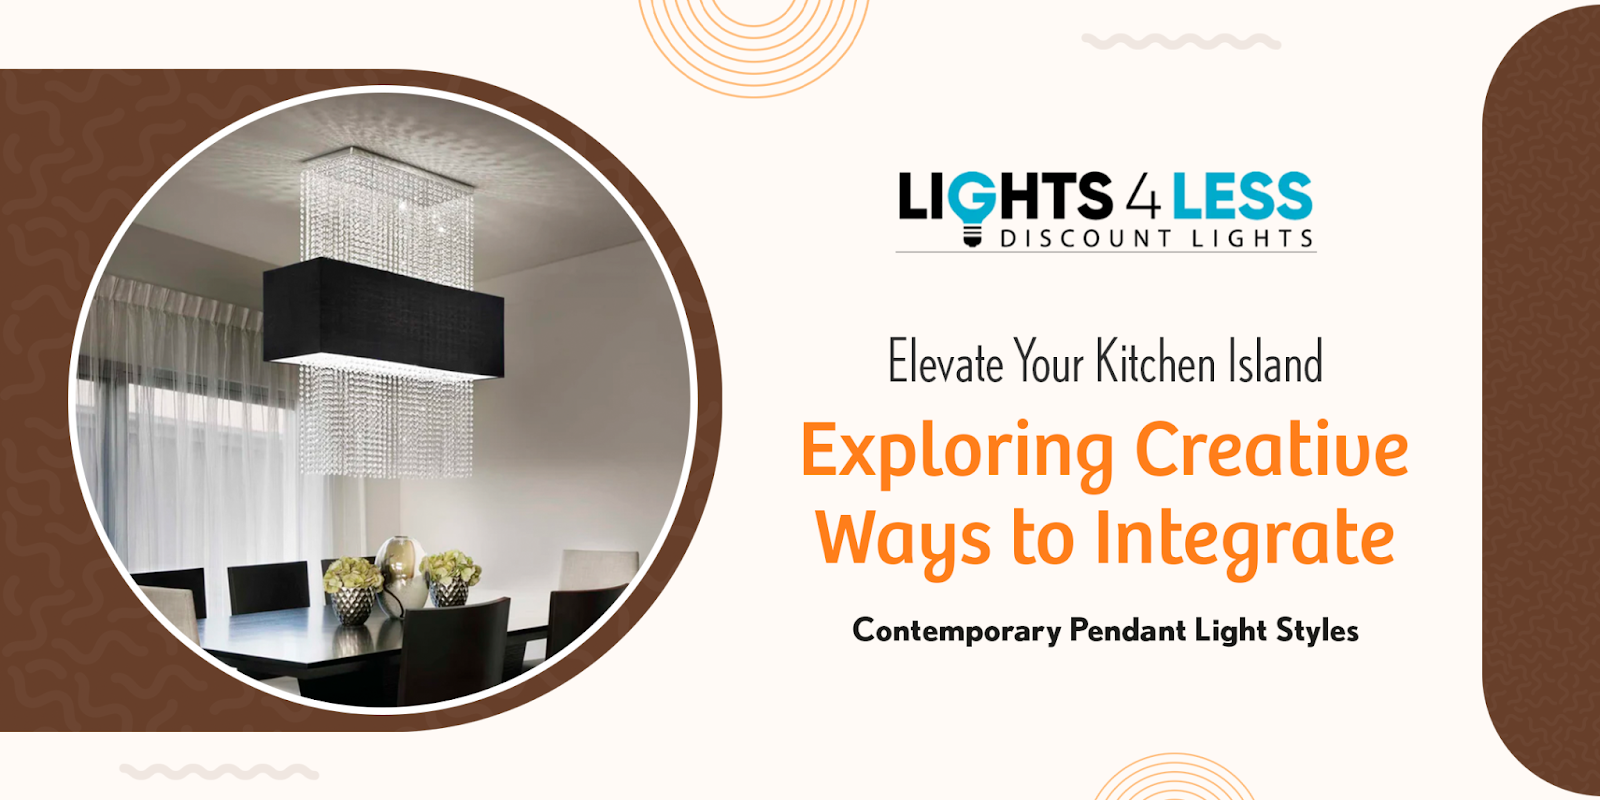 How Can You Incorporate Contemporary Pendant Light Styles Into Your Kitchen Island